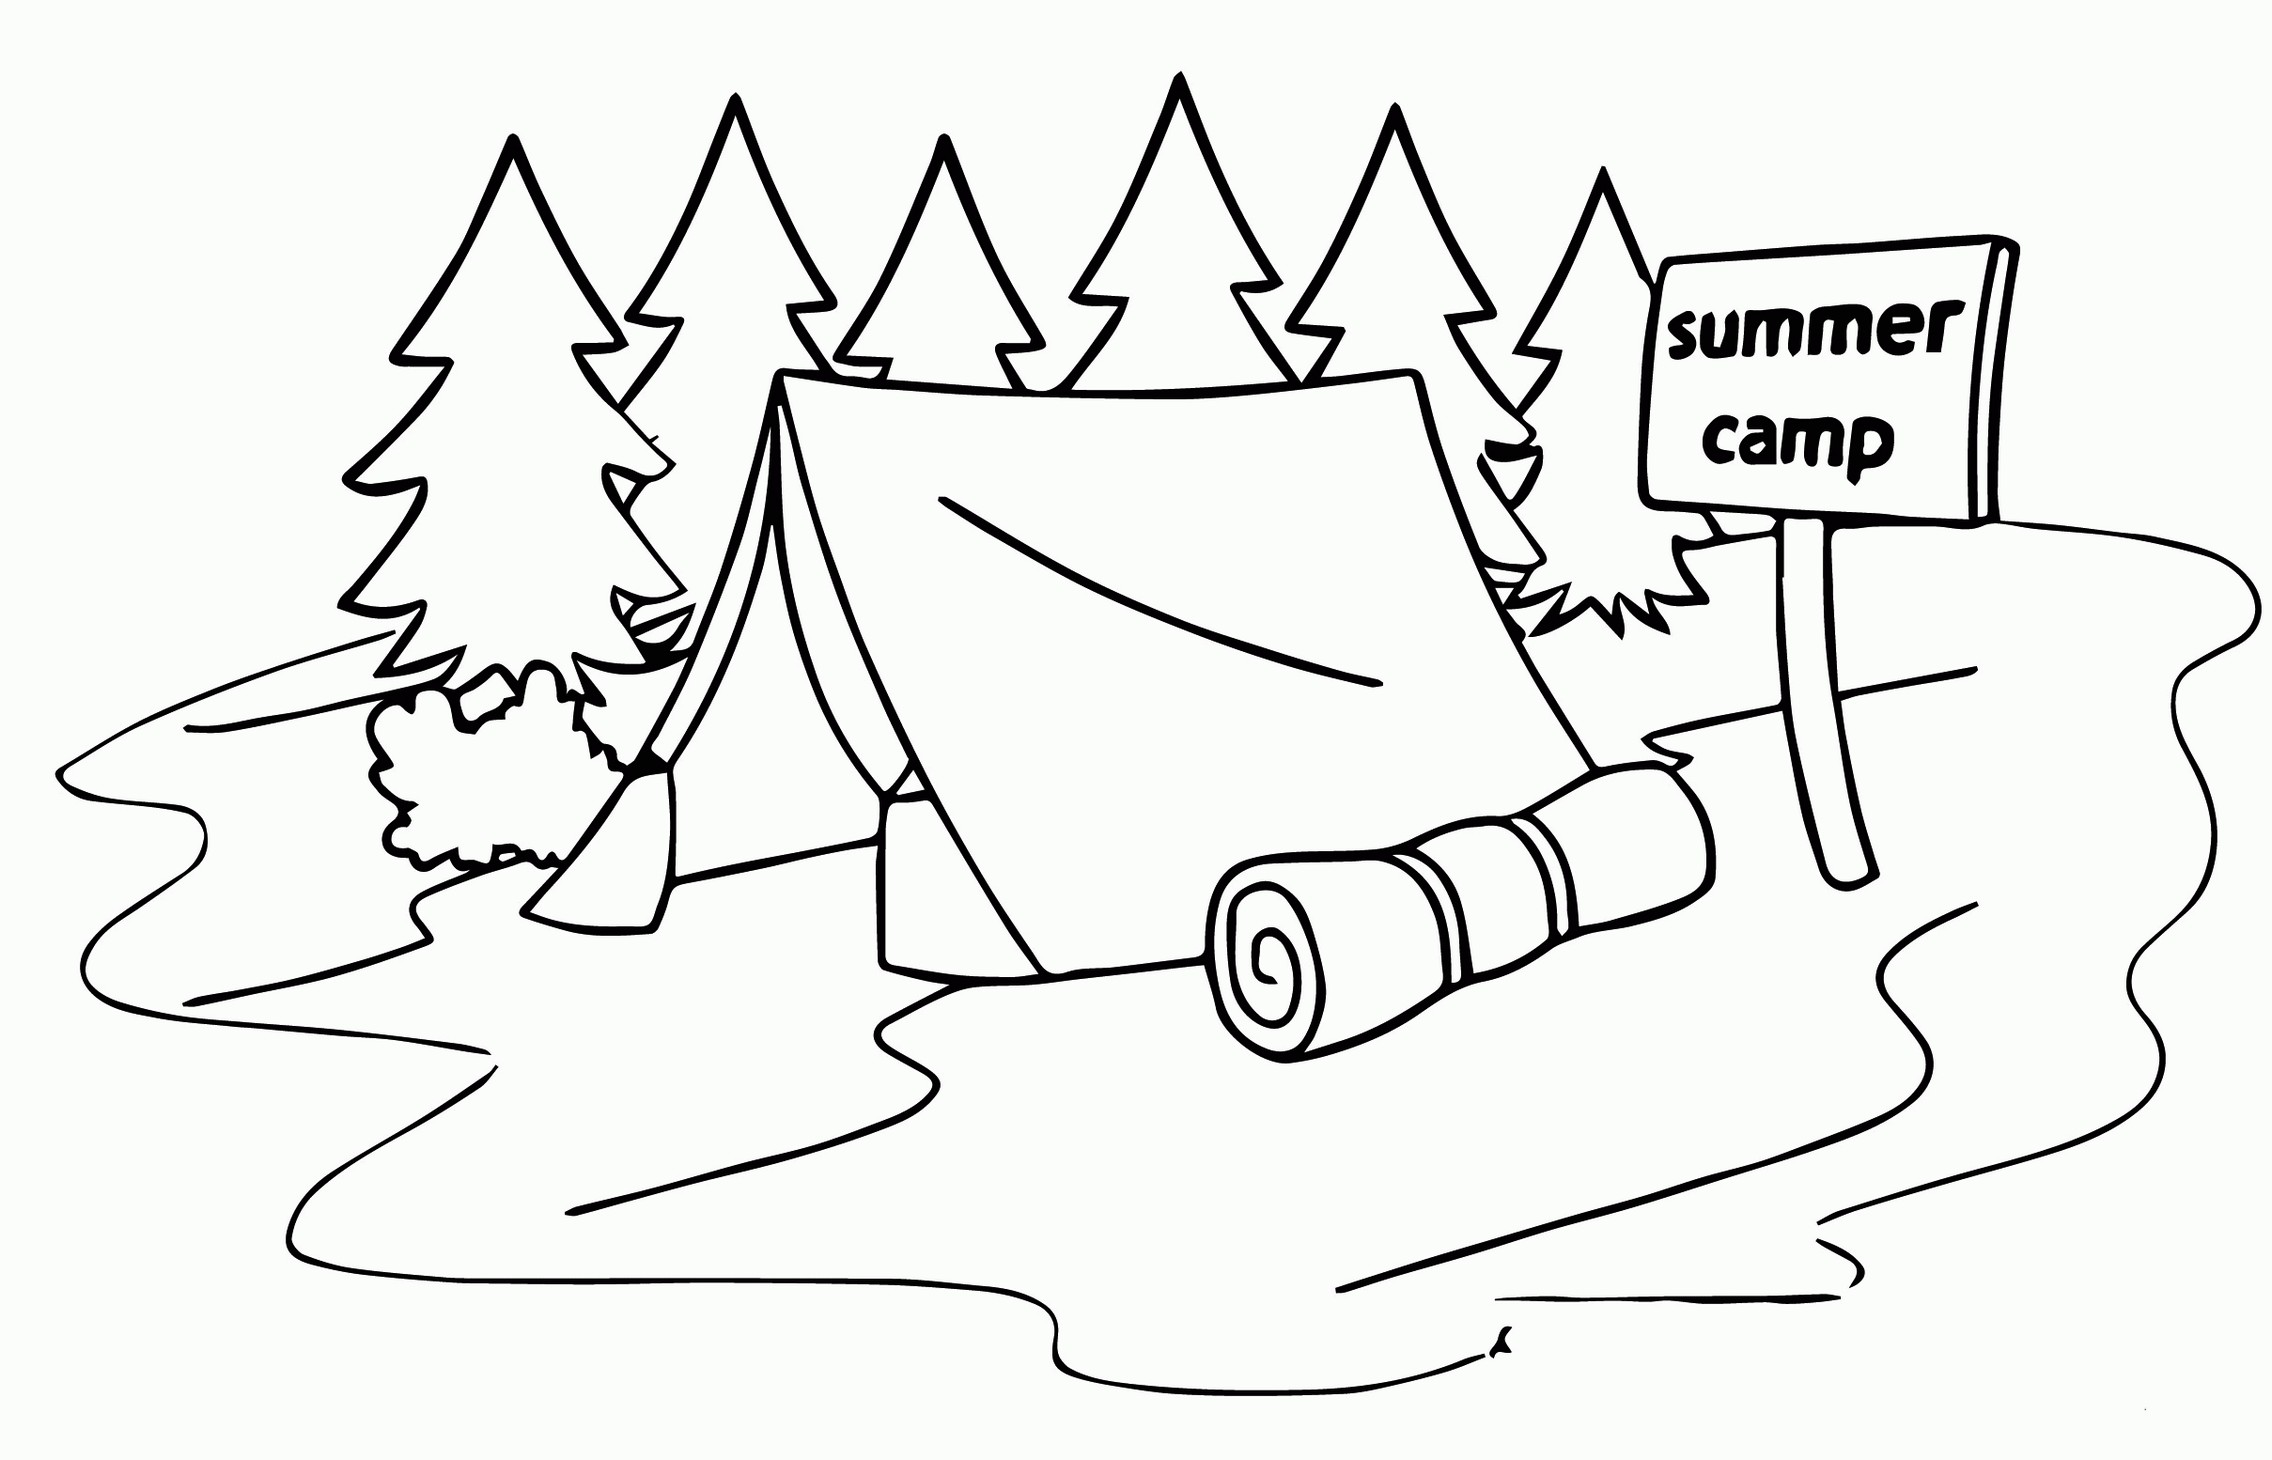 nice-tent-art-camping-coloring-pages-camping-coloring-pages-camping